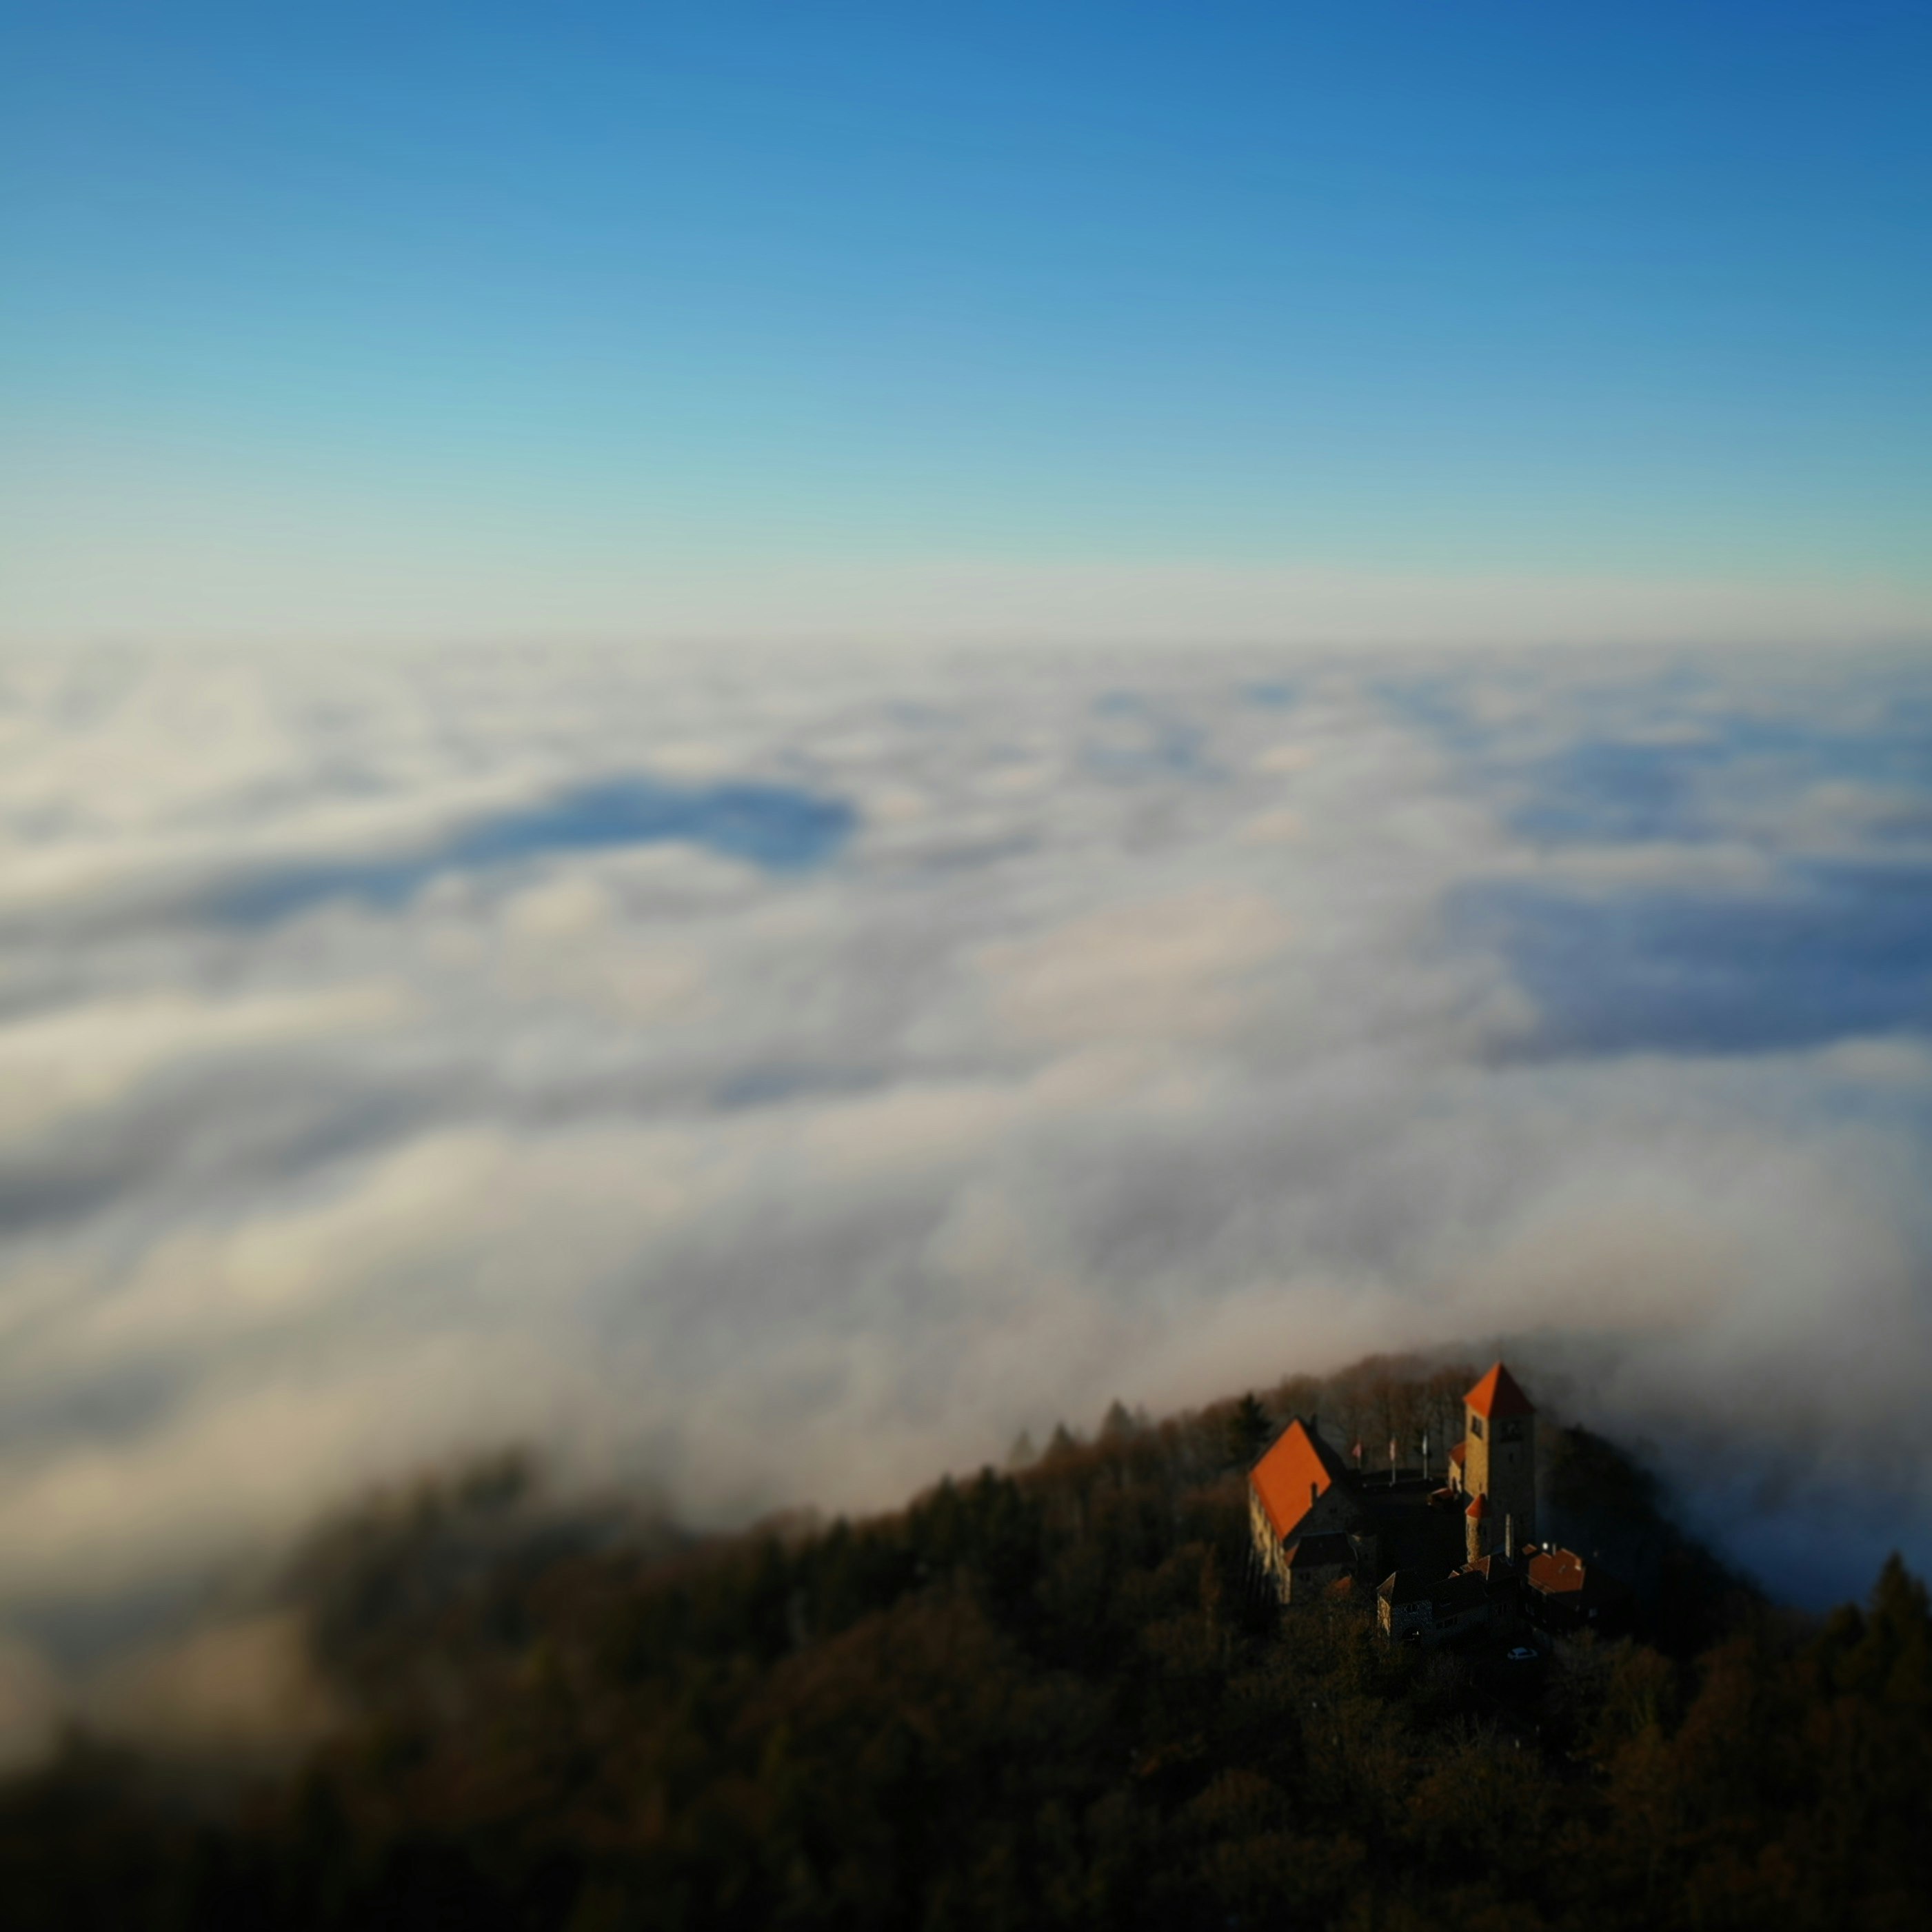 cabin on hill above clouds